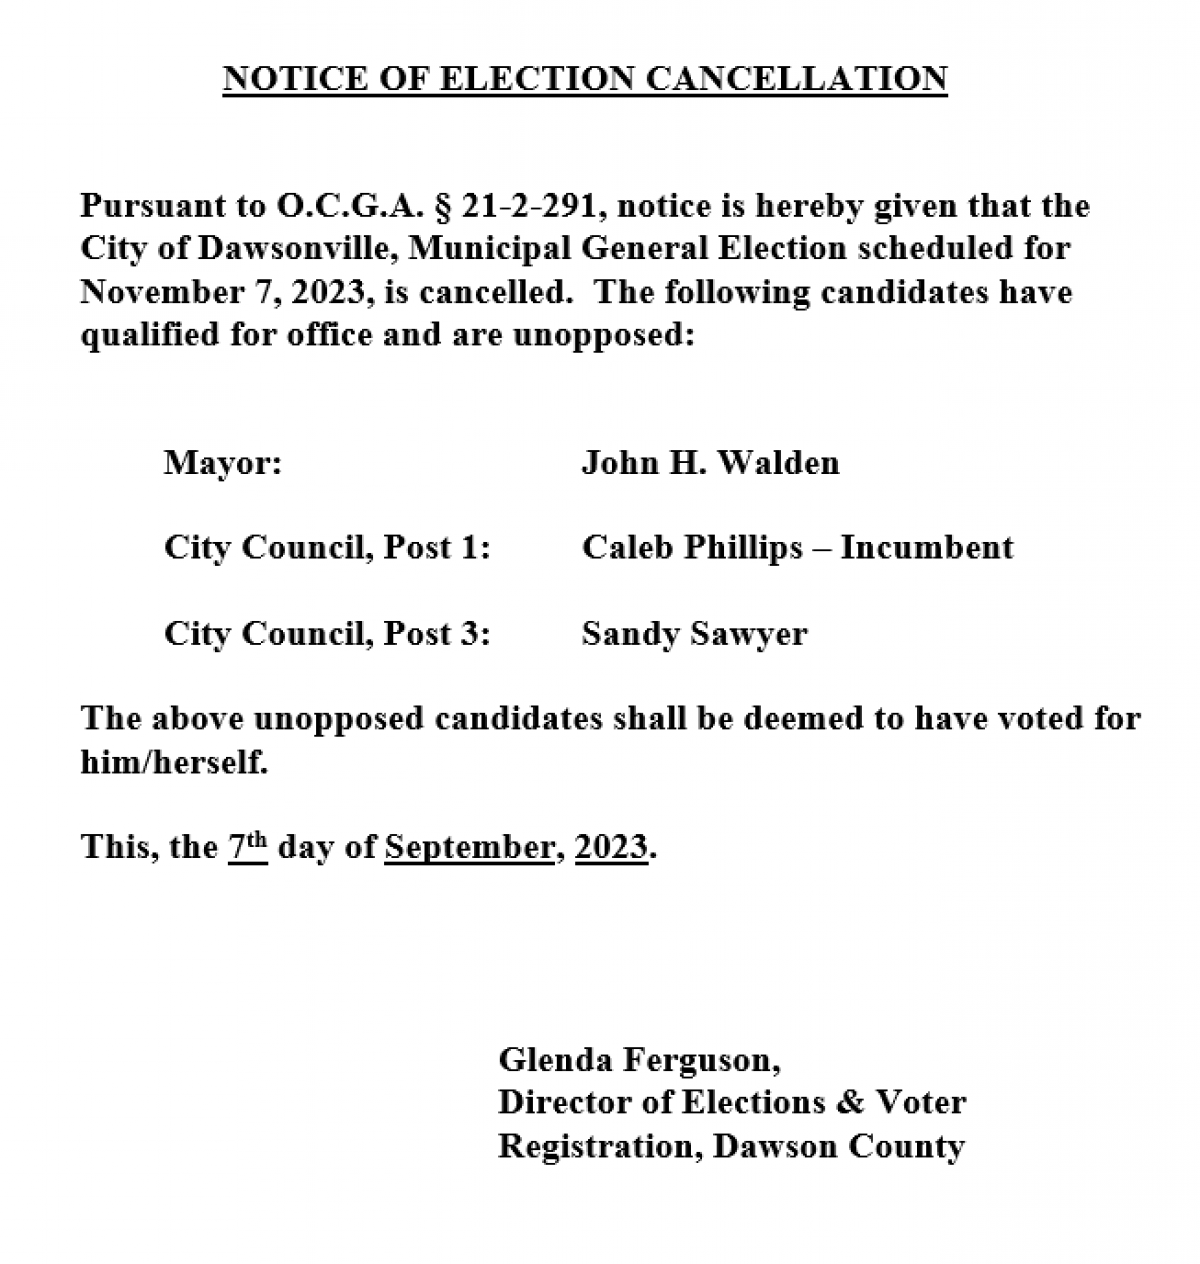 Notice of Municipal General Election Cancellation